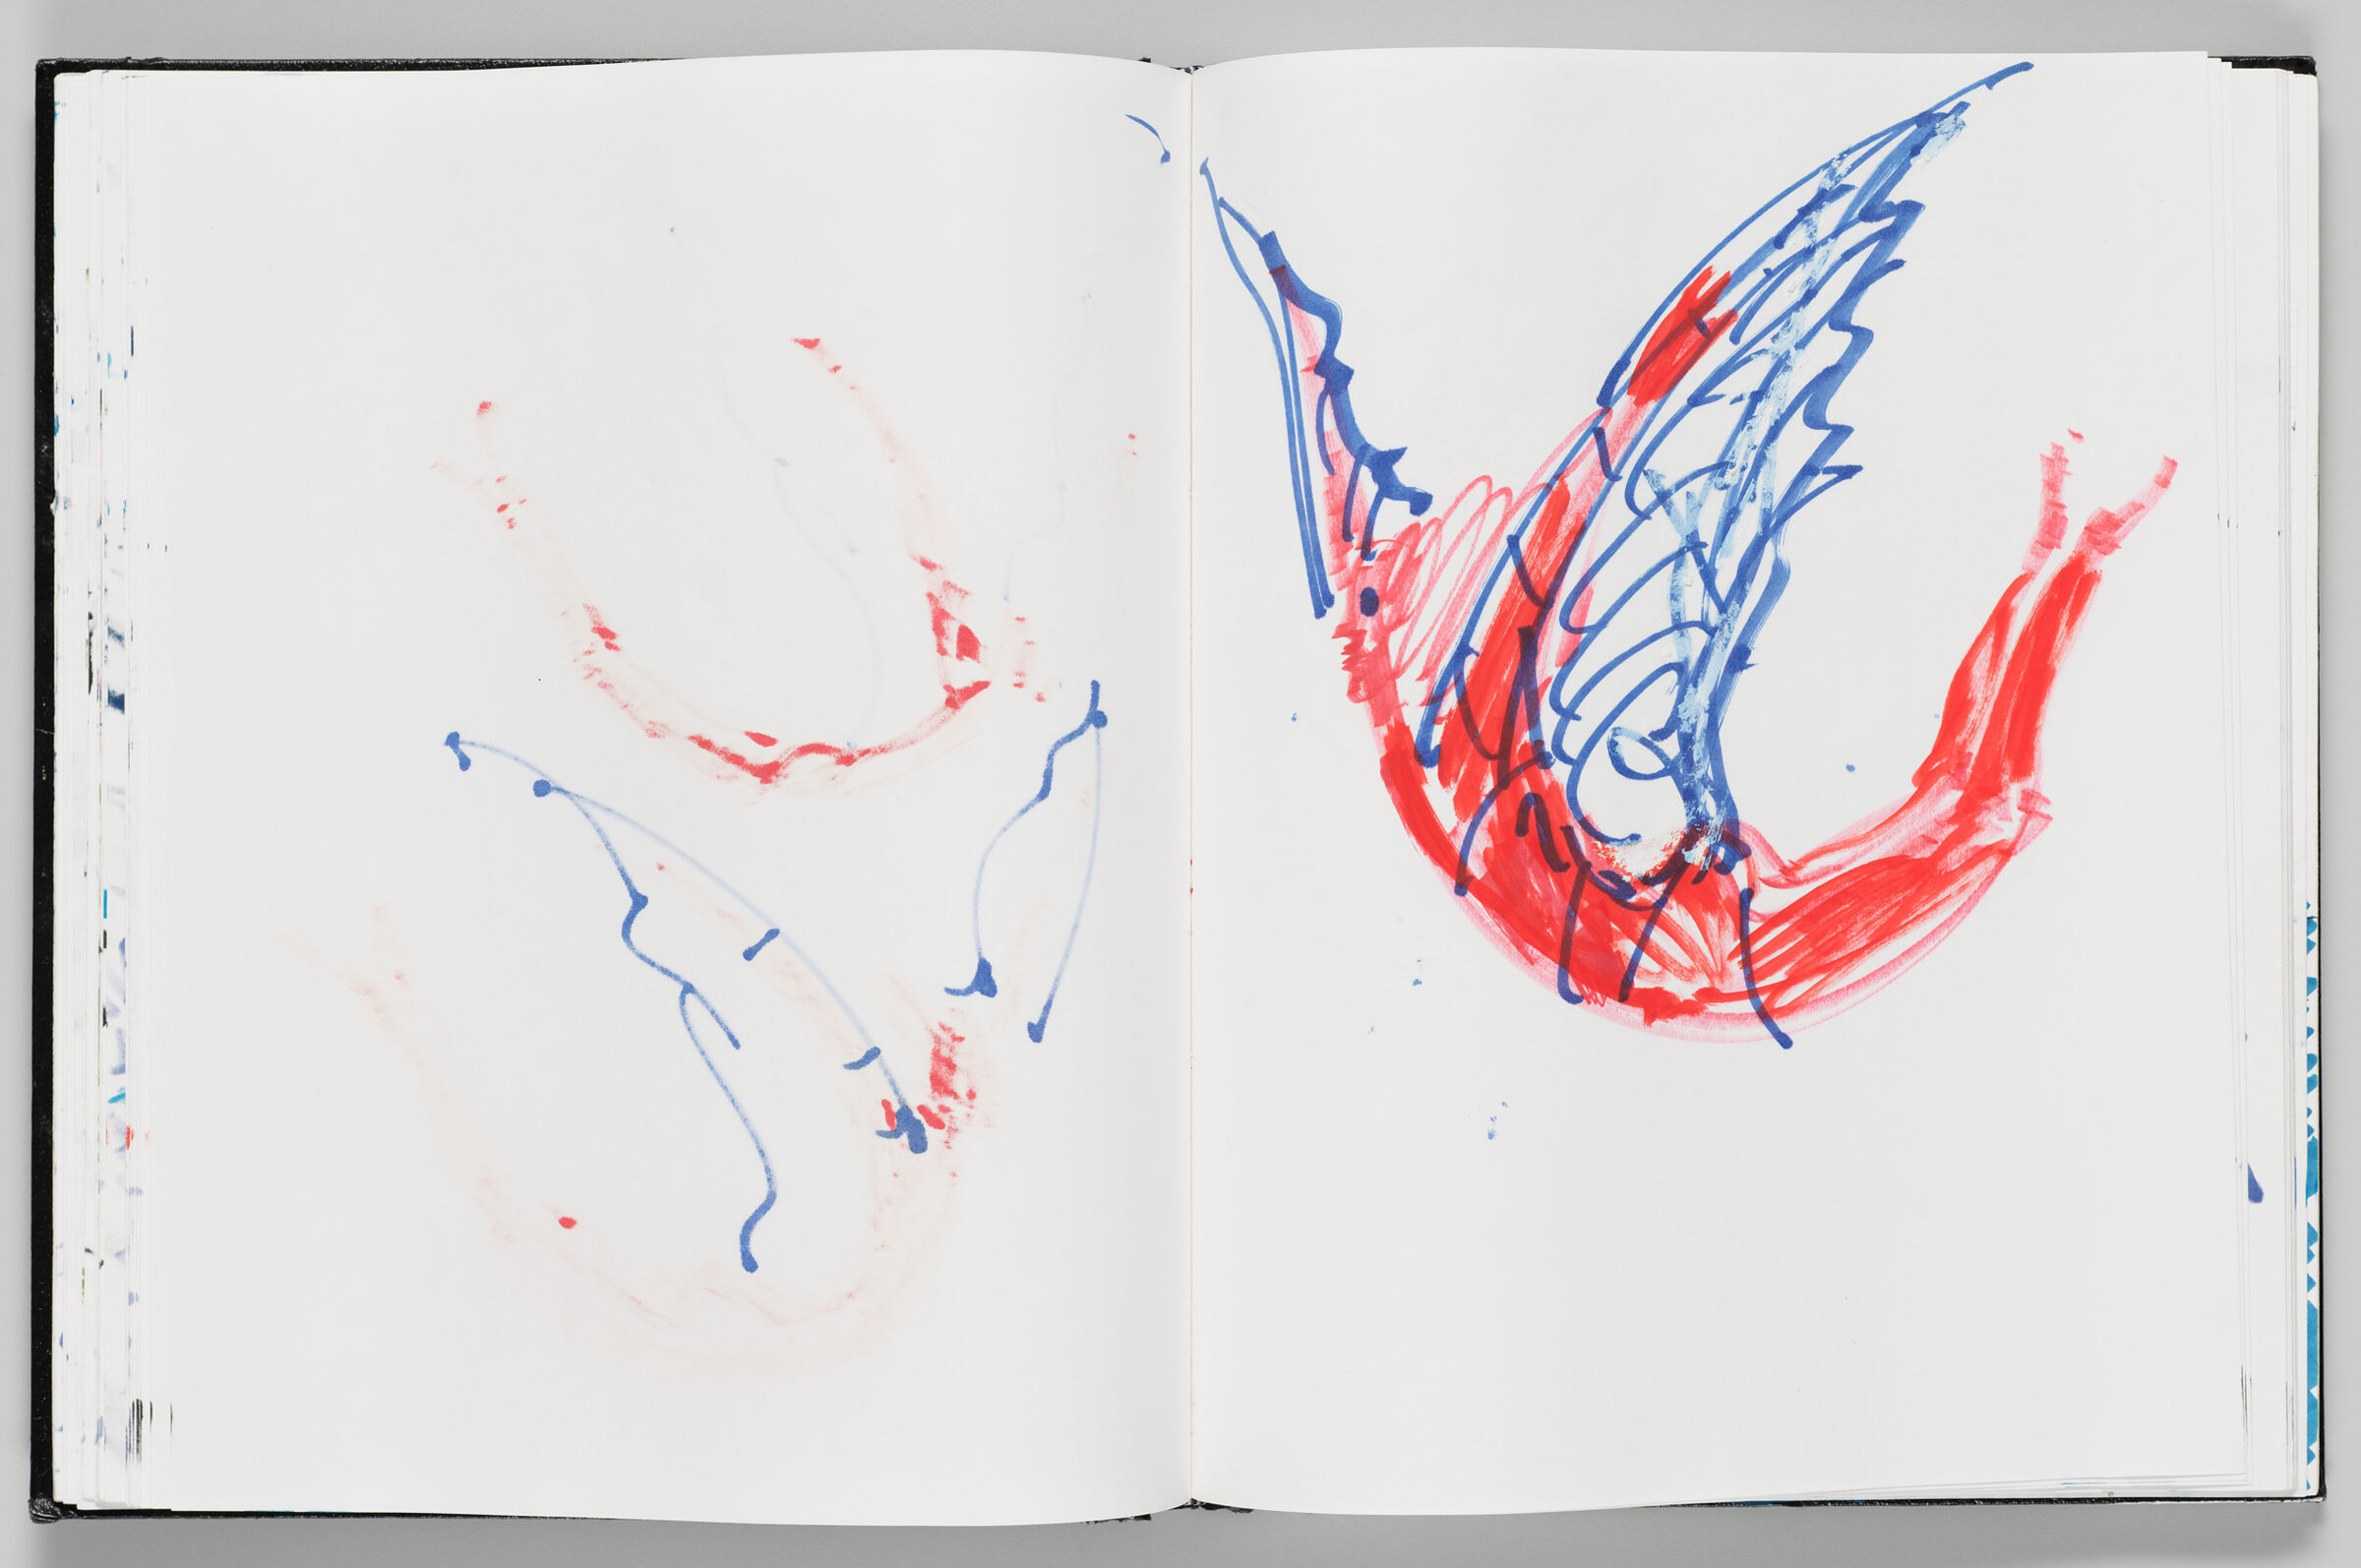 Untitled (Bleed-Through Of Previous Page, Left Page); Untitled (Flying Figure, Right Page)